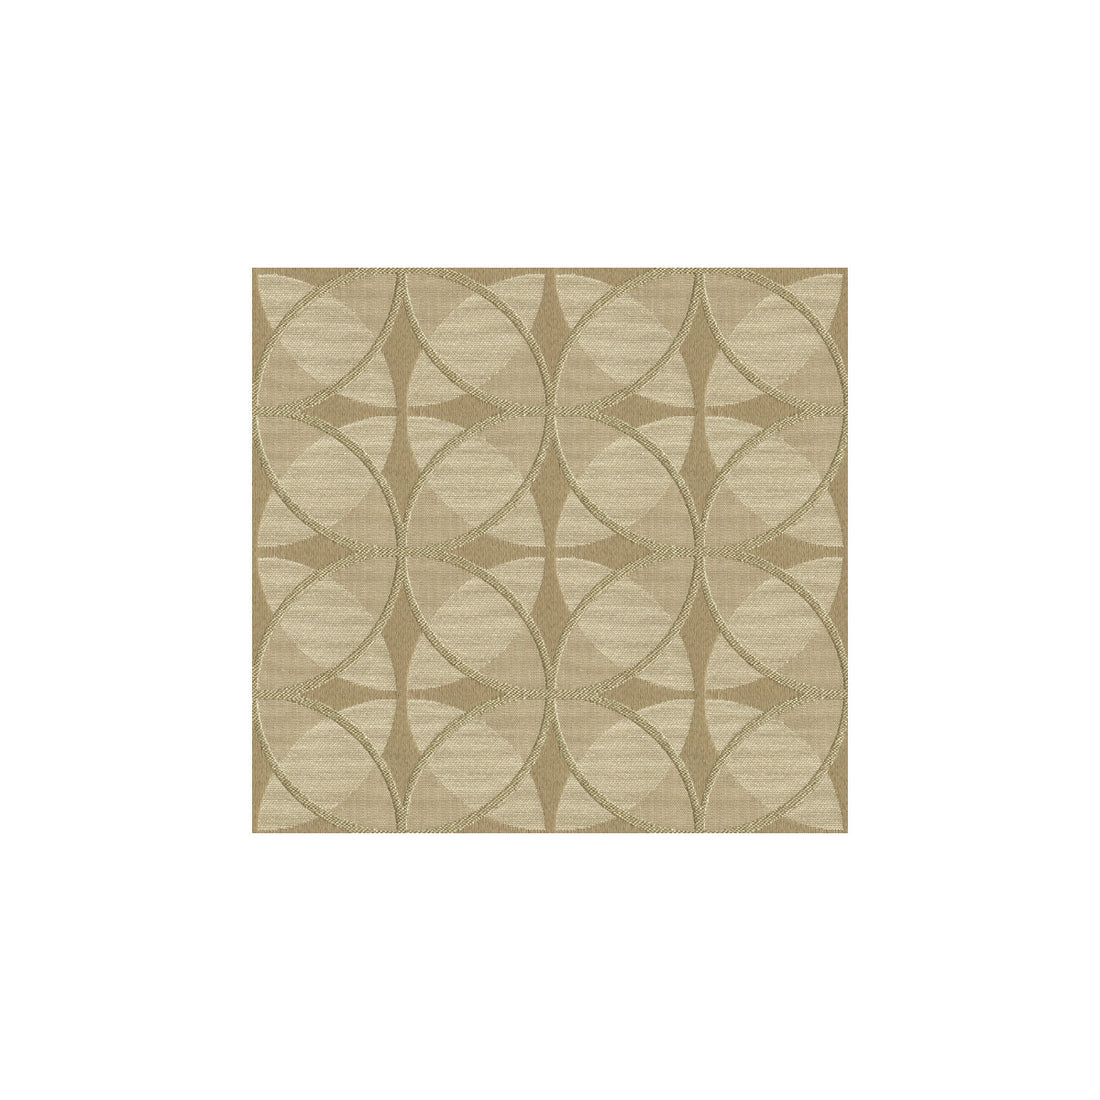 Clockwork fabric in opal color - pattern 31526.106.0 - by Kravet Contract in the Contract Gis collection